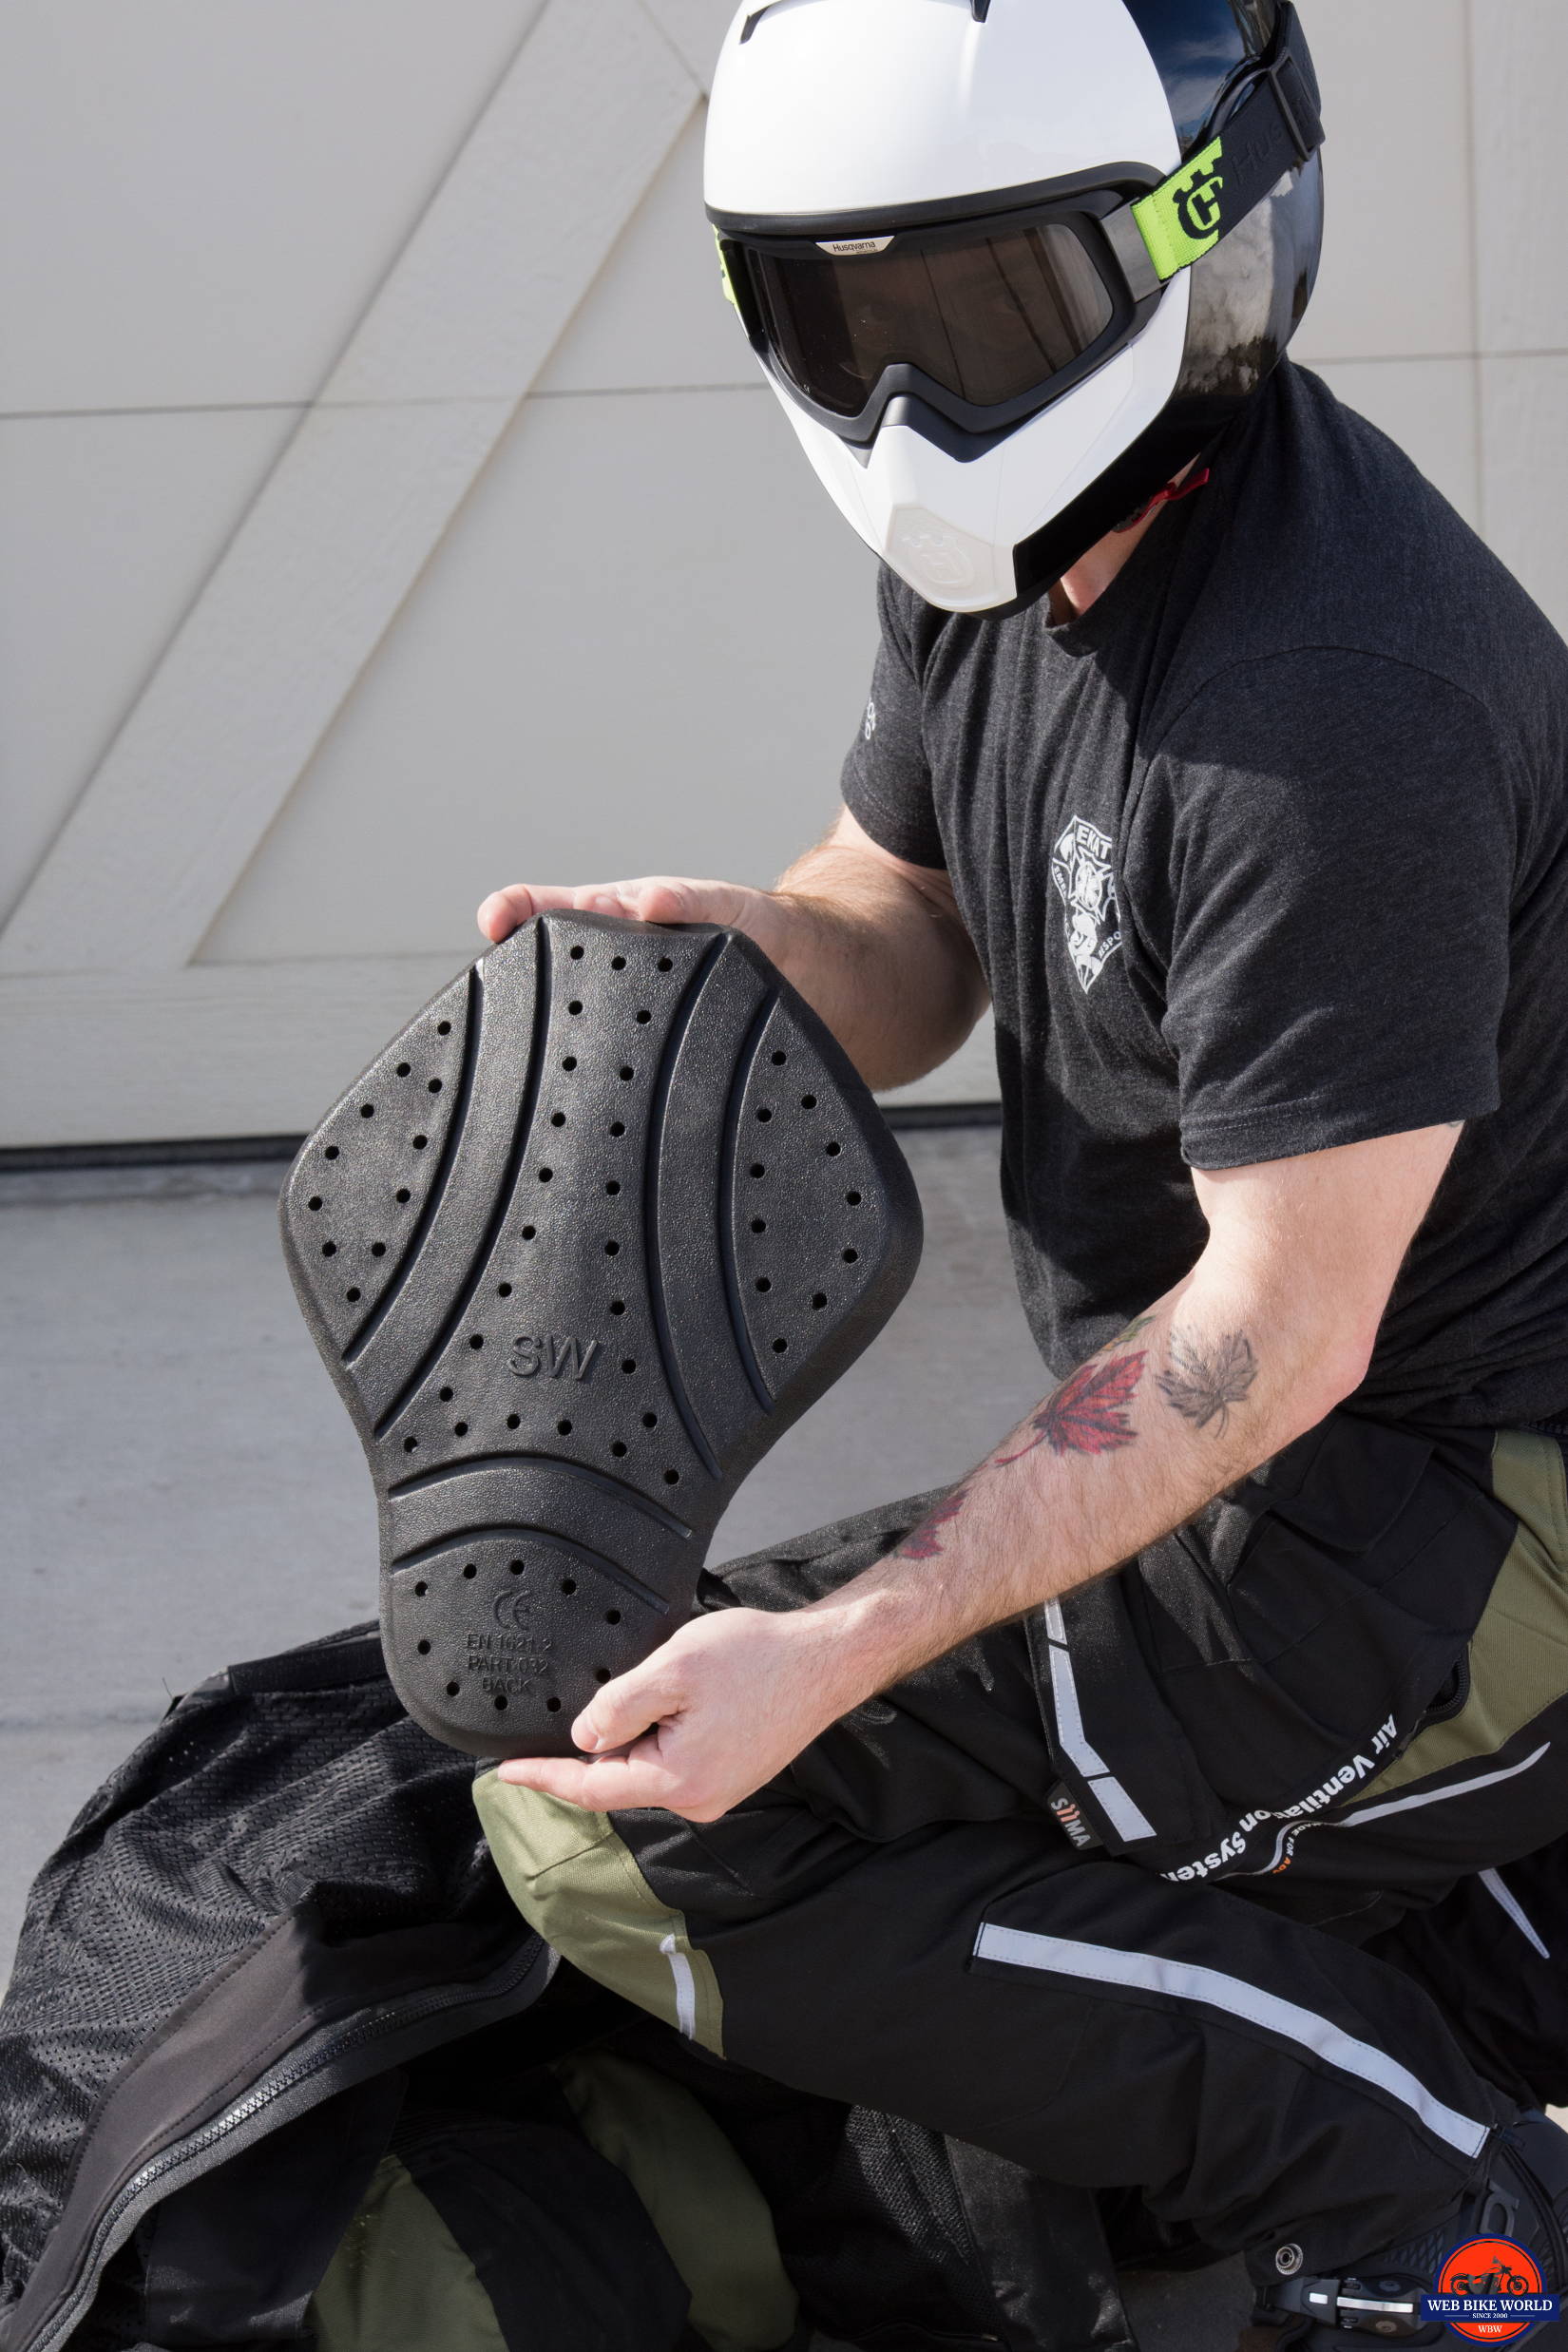 Motocross Chest Protector Review and Comparison - webBikeWorld